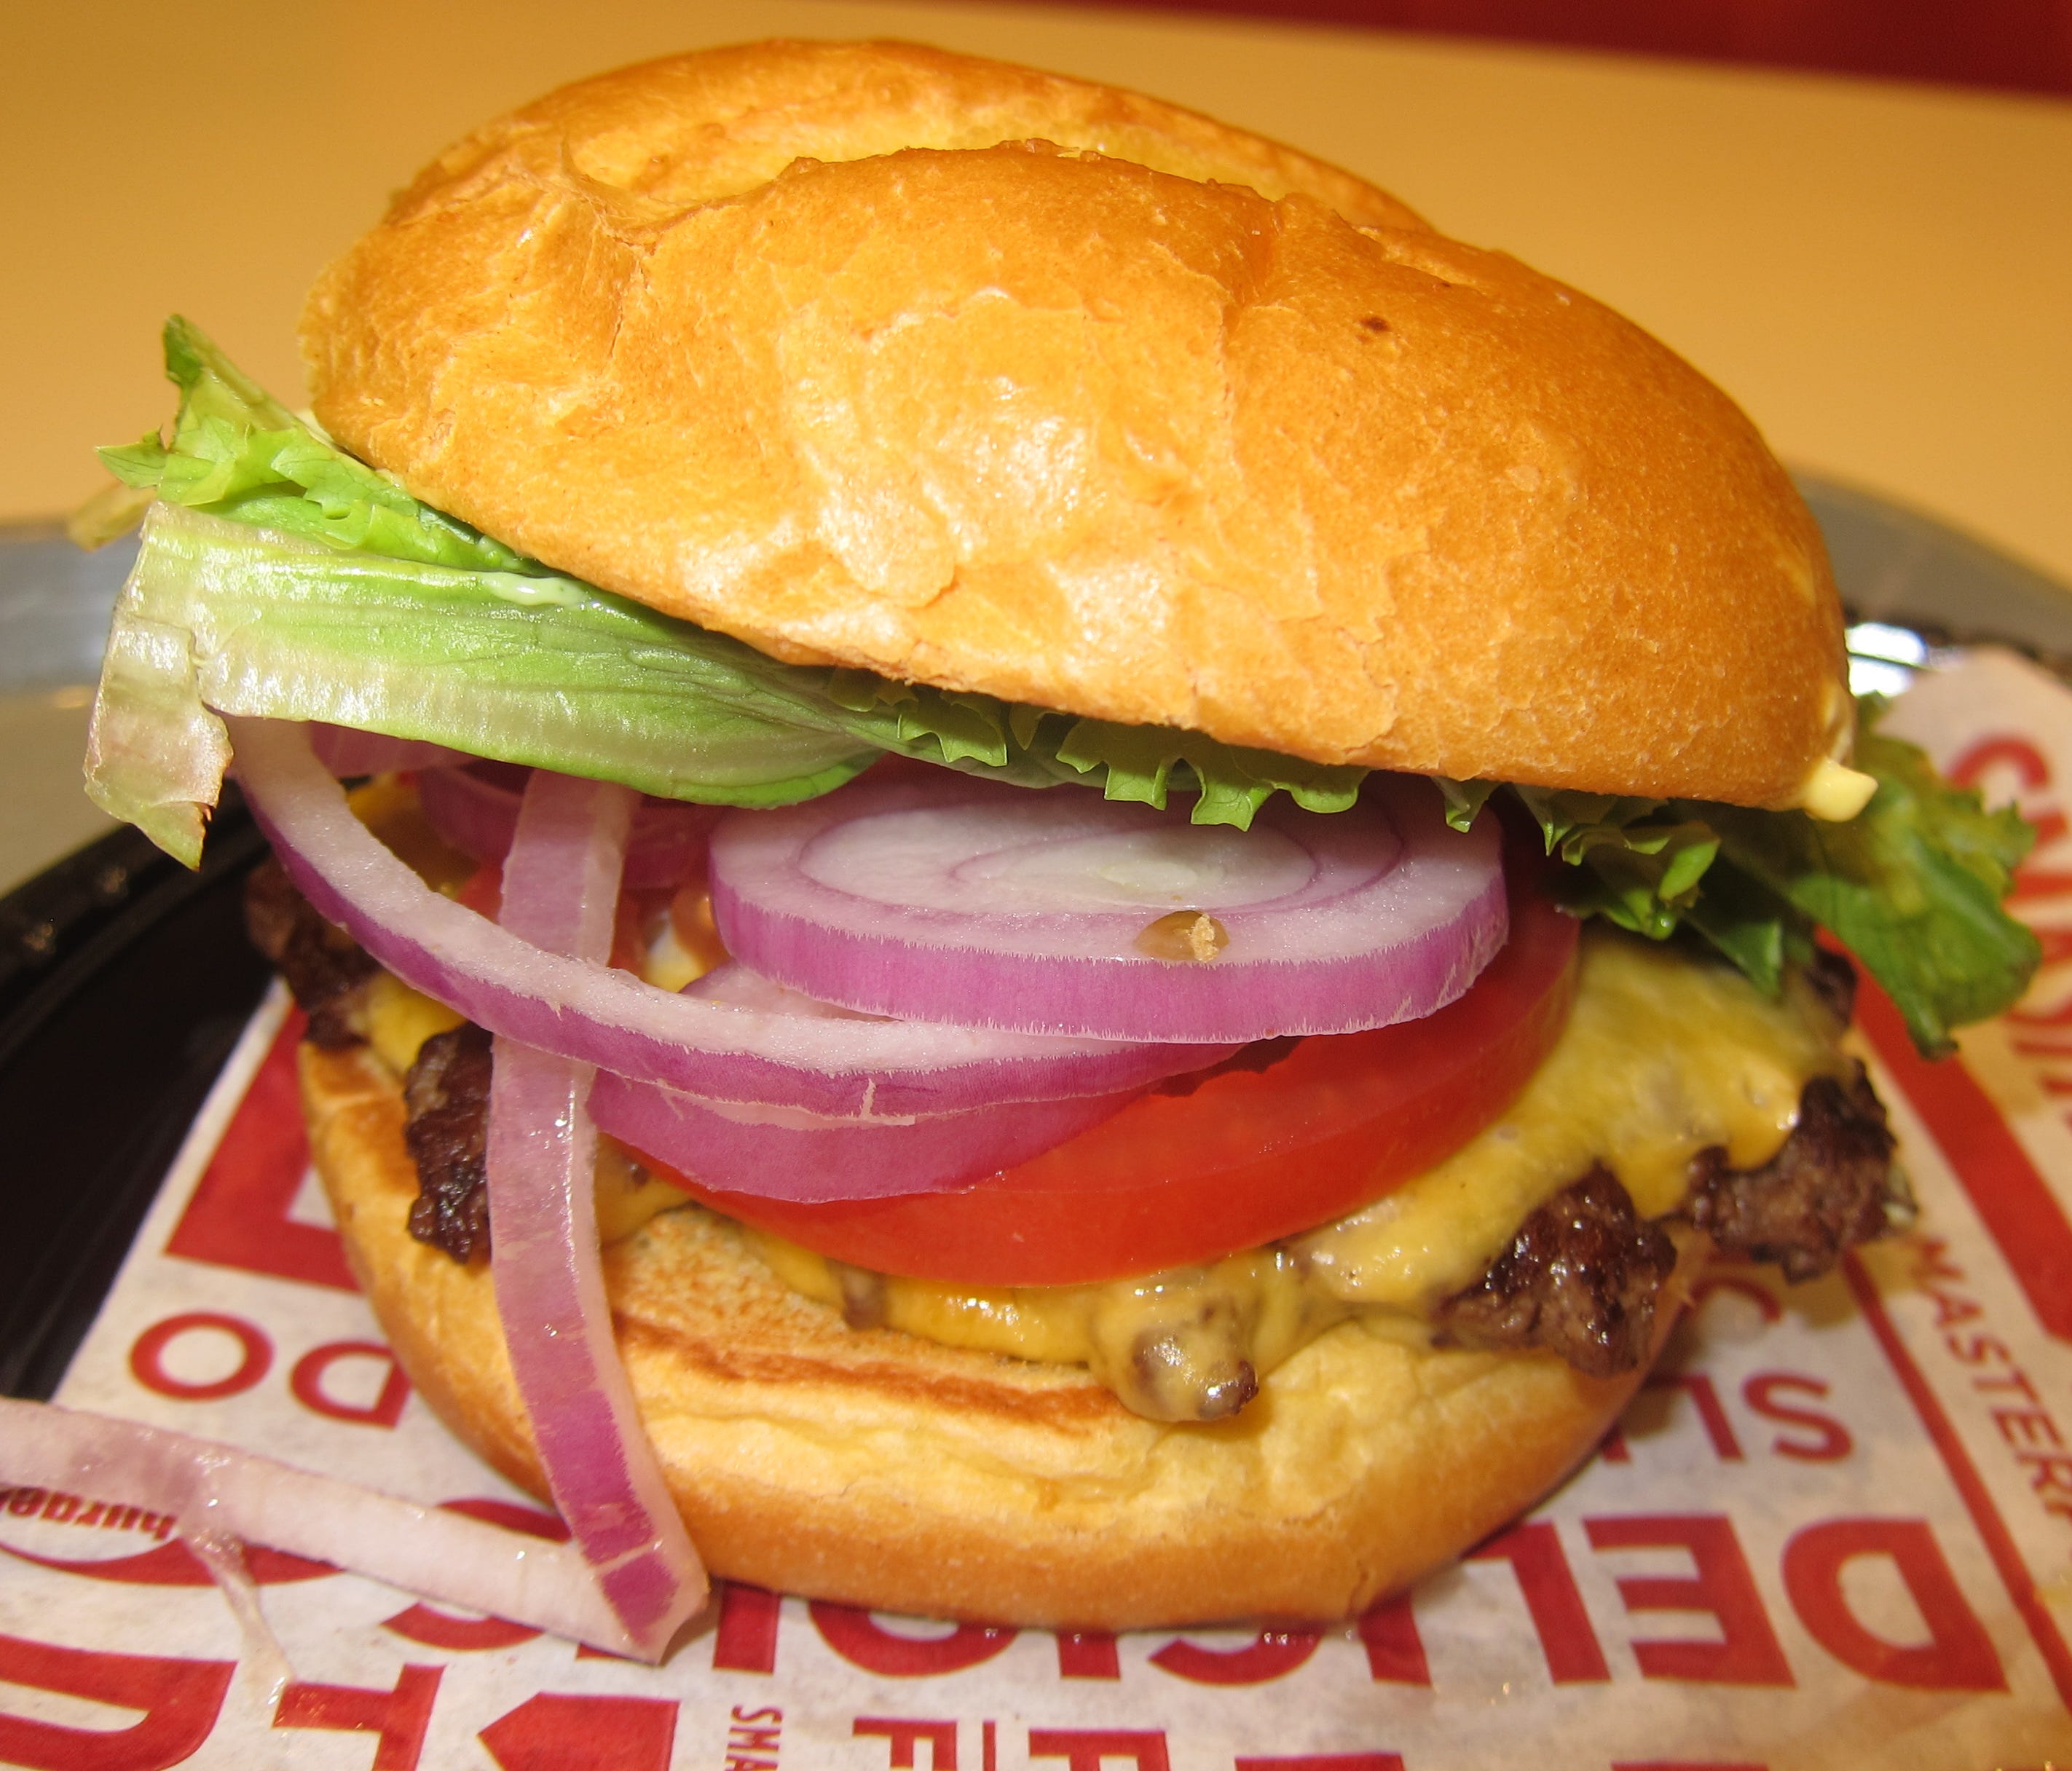 Smashburger's Classic Smash assembled - all the burgers are served on a high-quality egg bun.